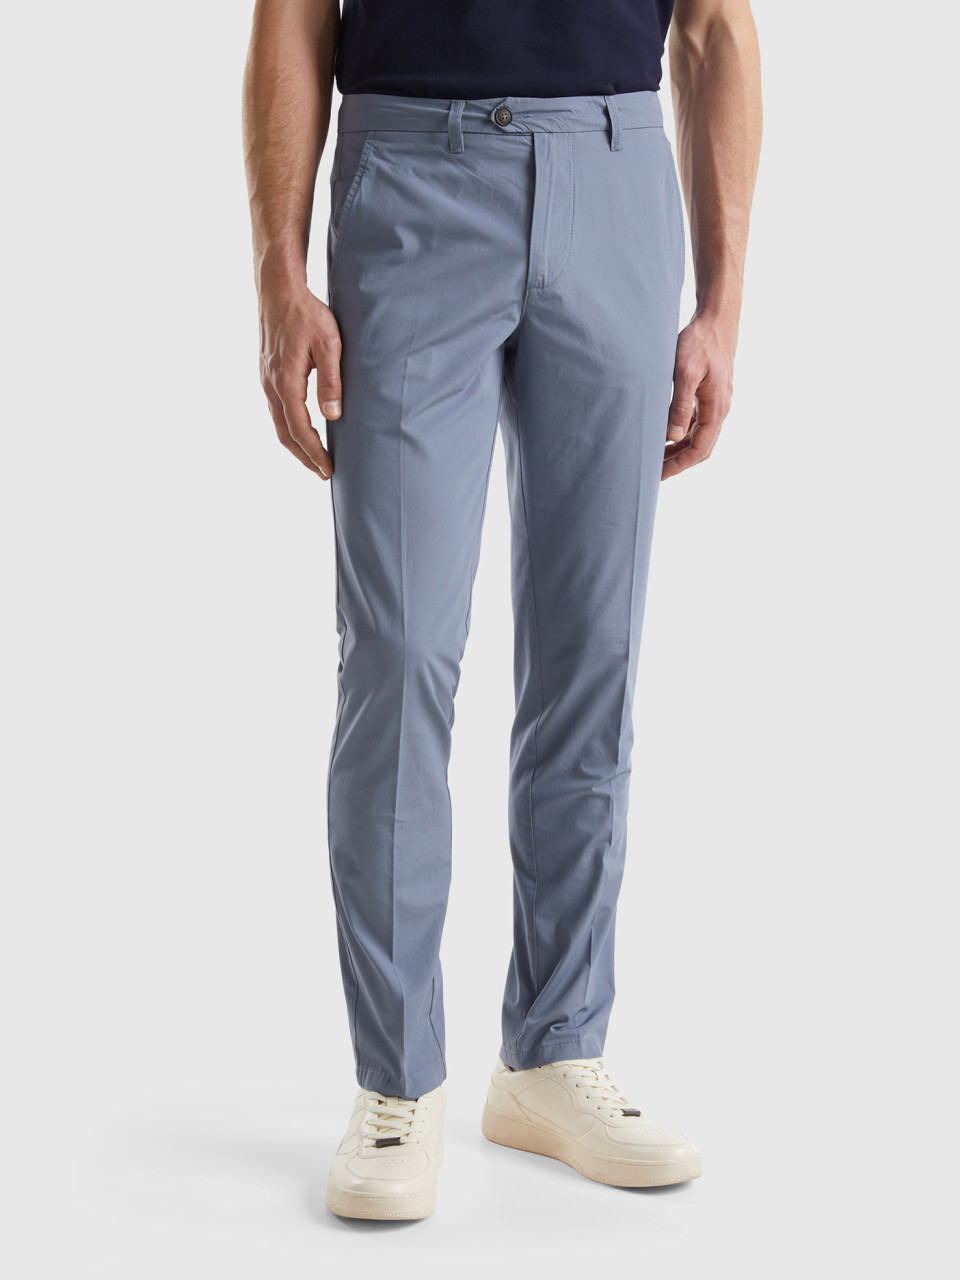 Benetton, Slim Fit Chinos In Light Cotton, Air Force Blue, Men